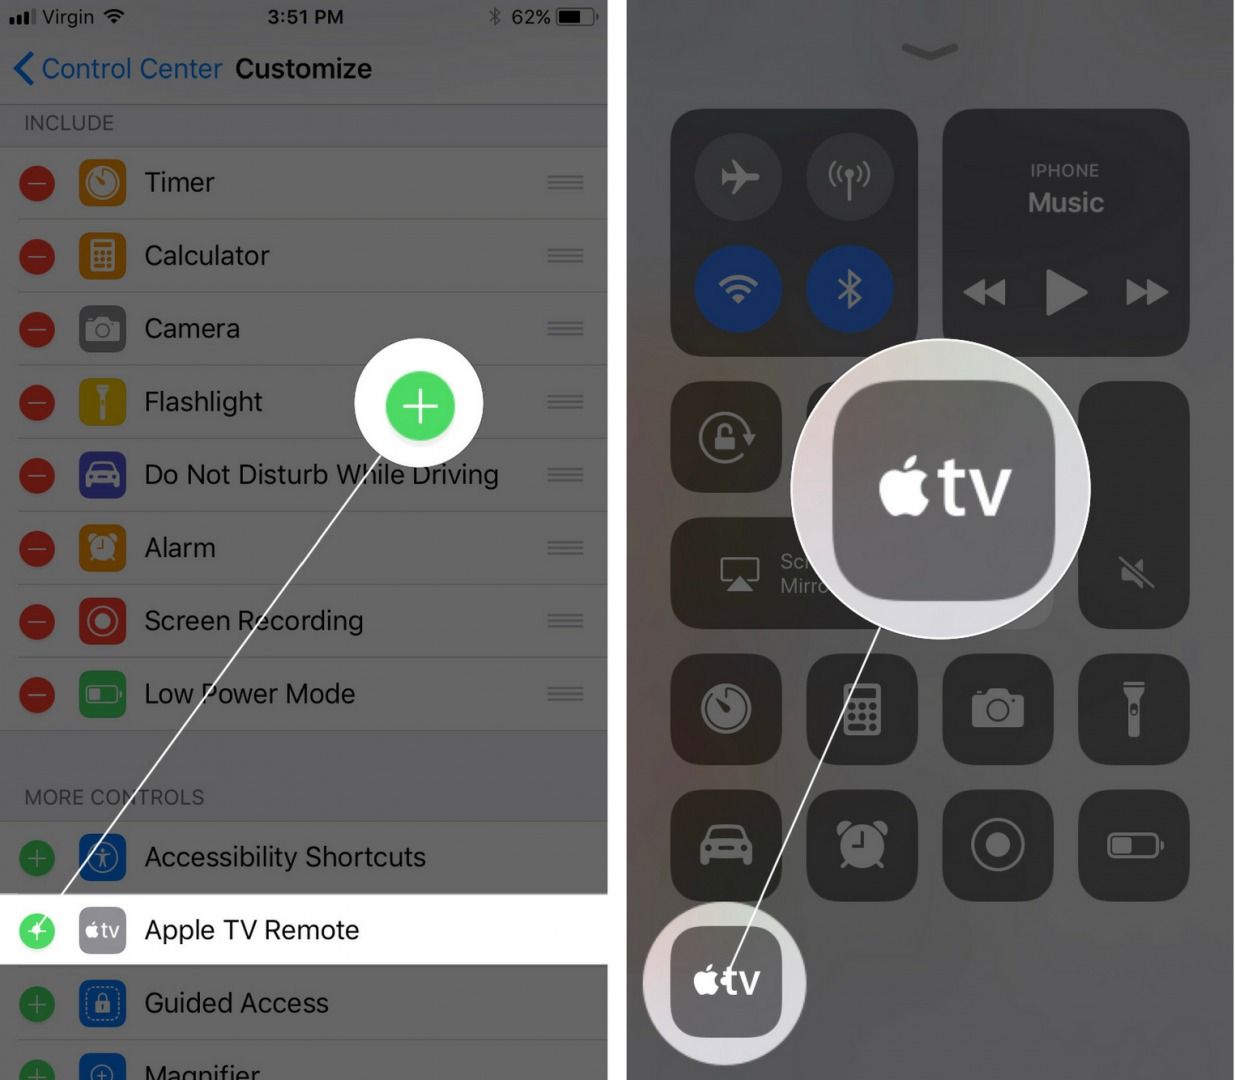 how to add apple tv remote to control center iphone